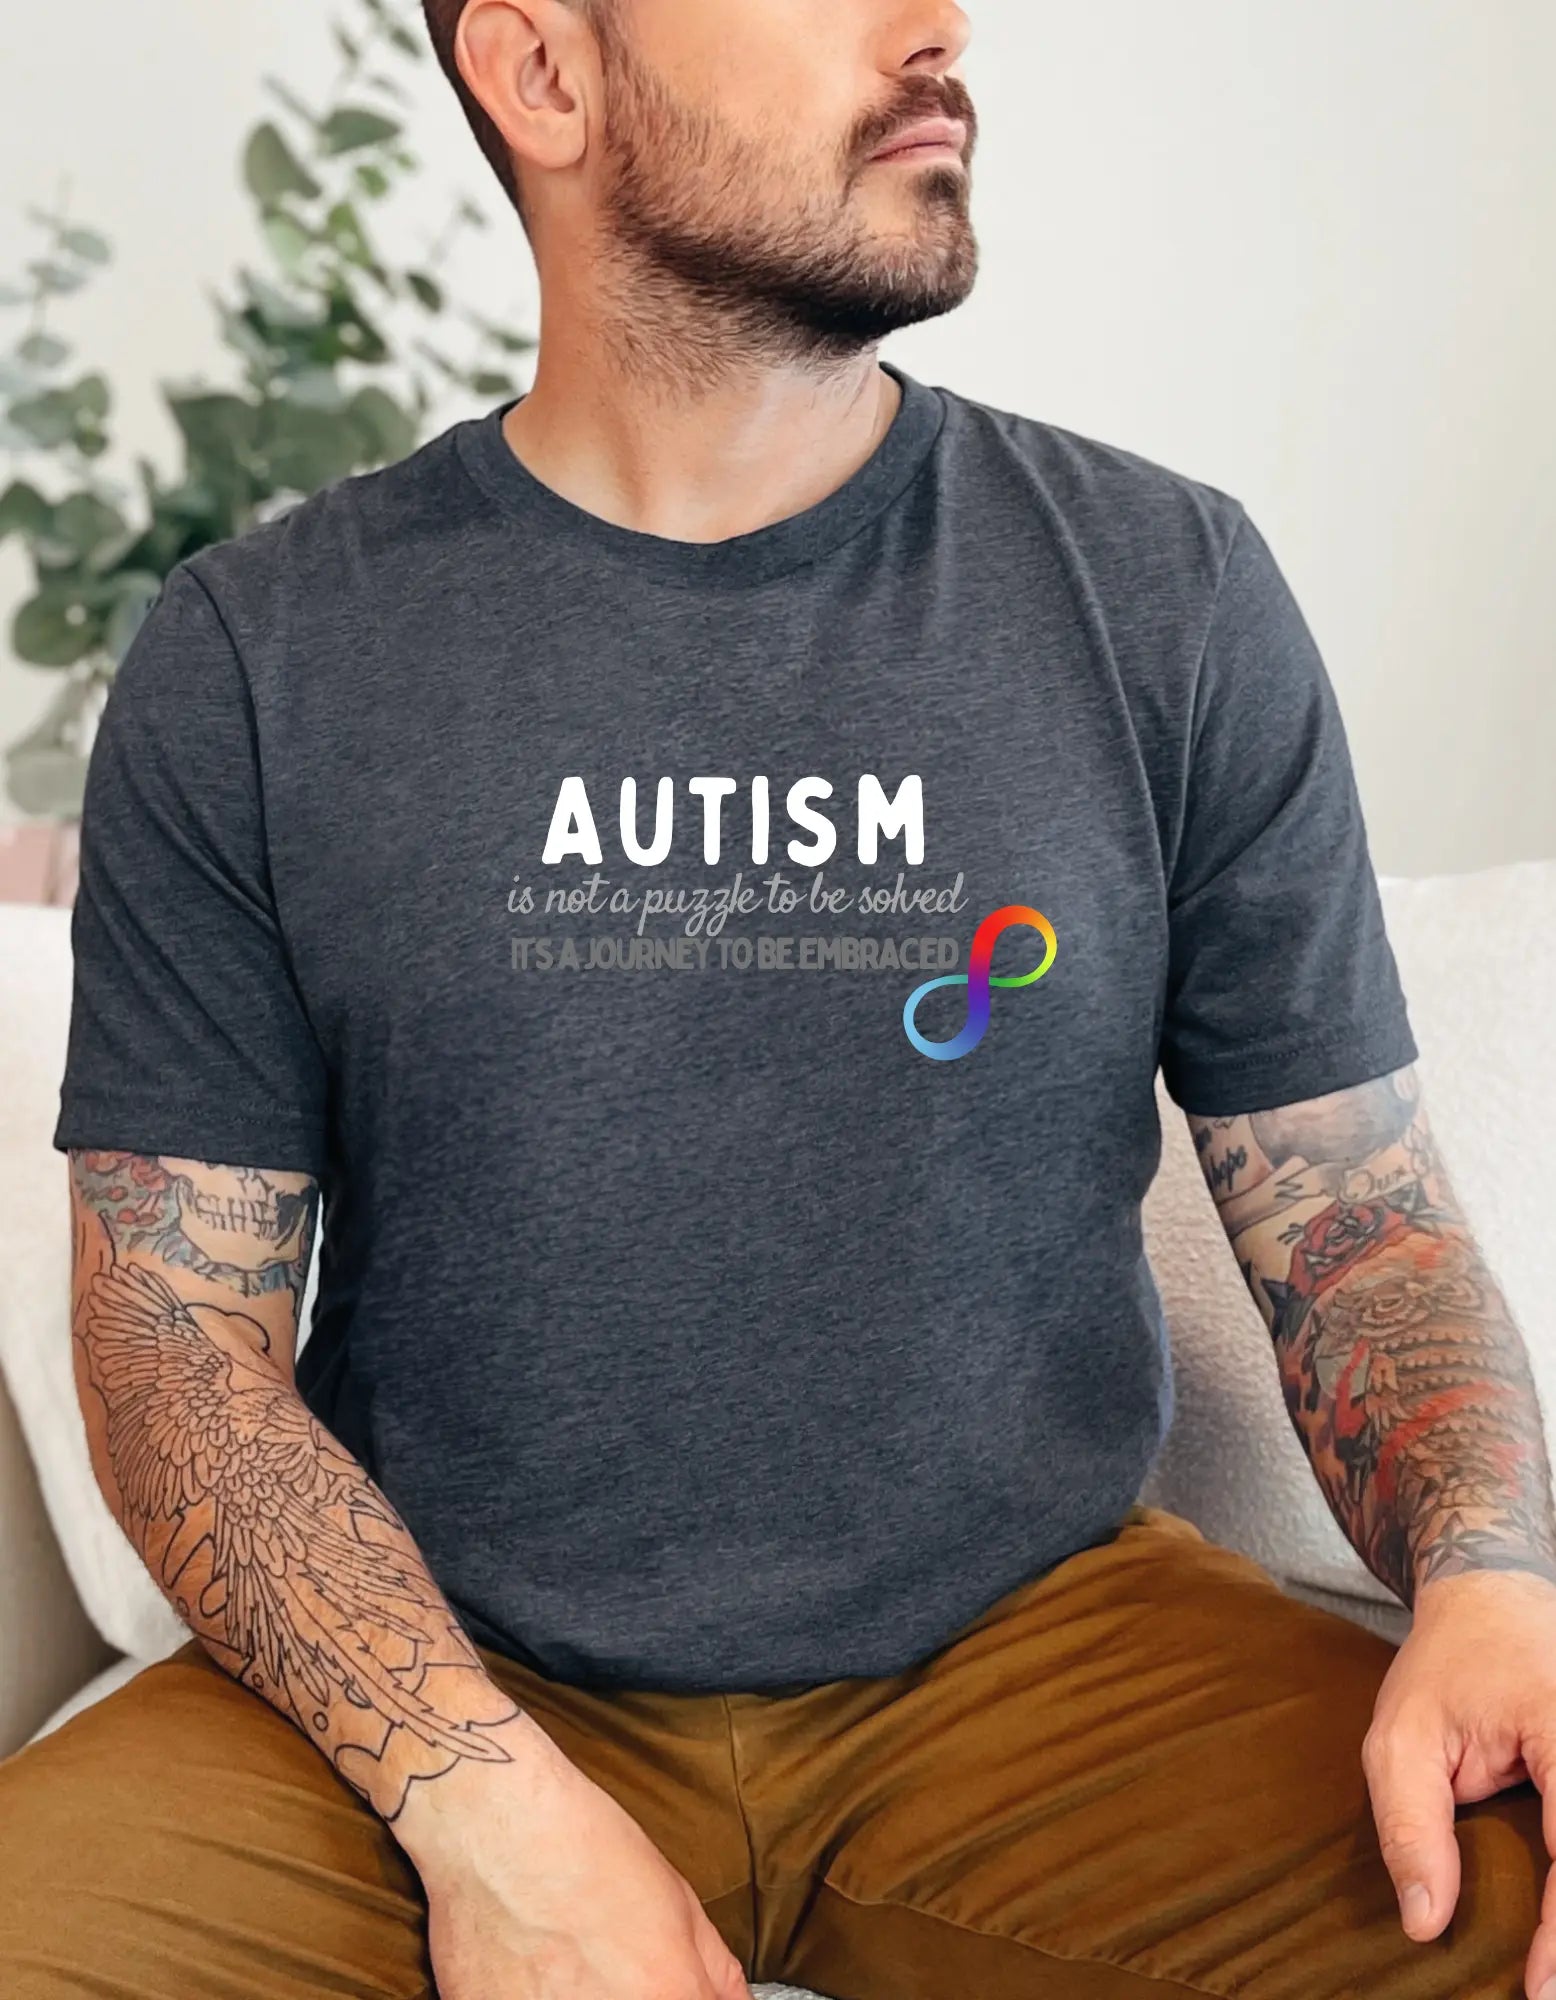 Autism Acceptance: Unisex Autism Shirt with Inspiring Message, Perfect for Family, Friends, and Supporters of the Autism Community Affordable ABA Materials